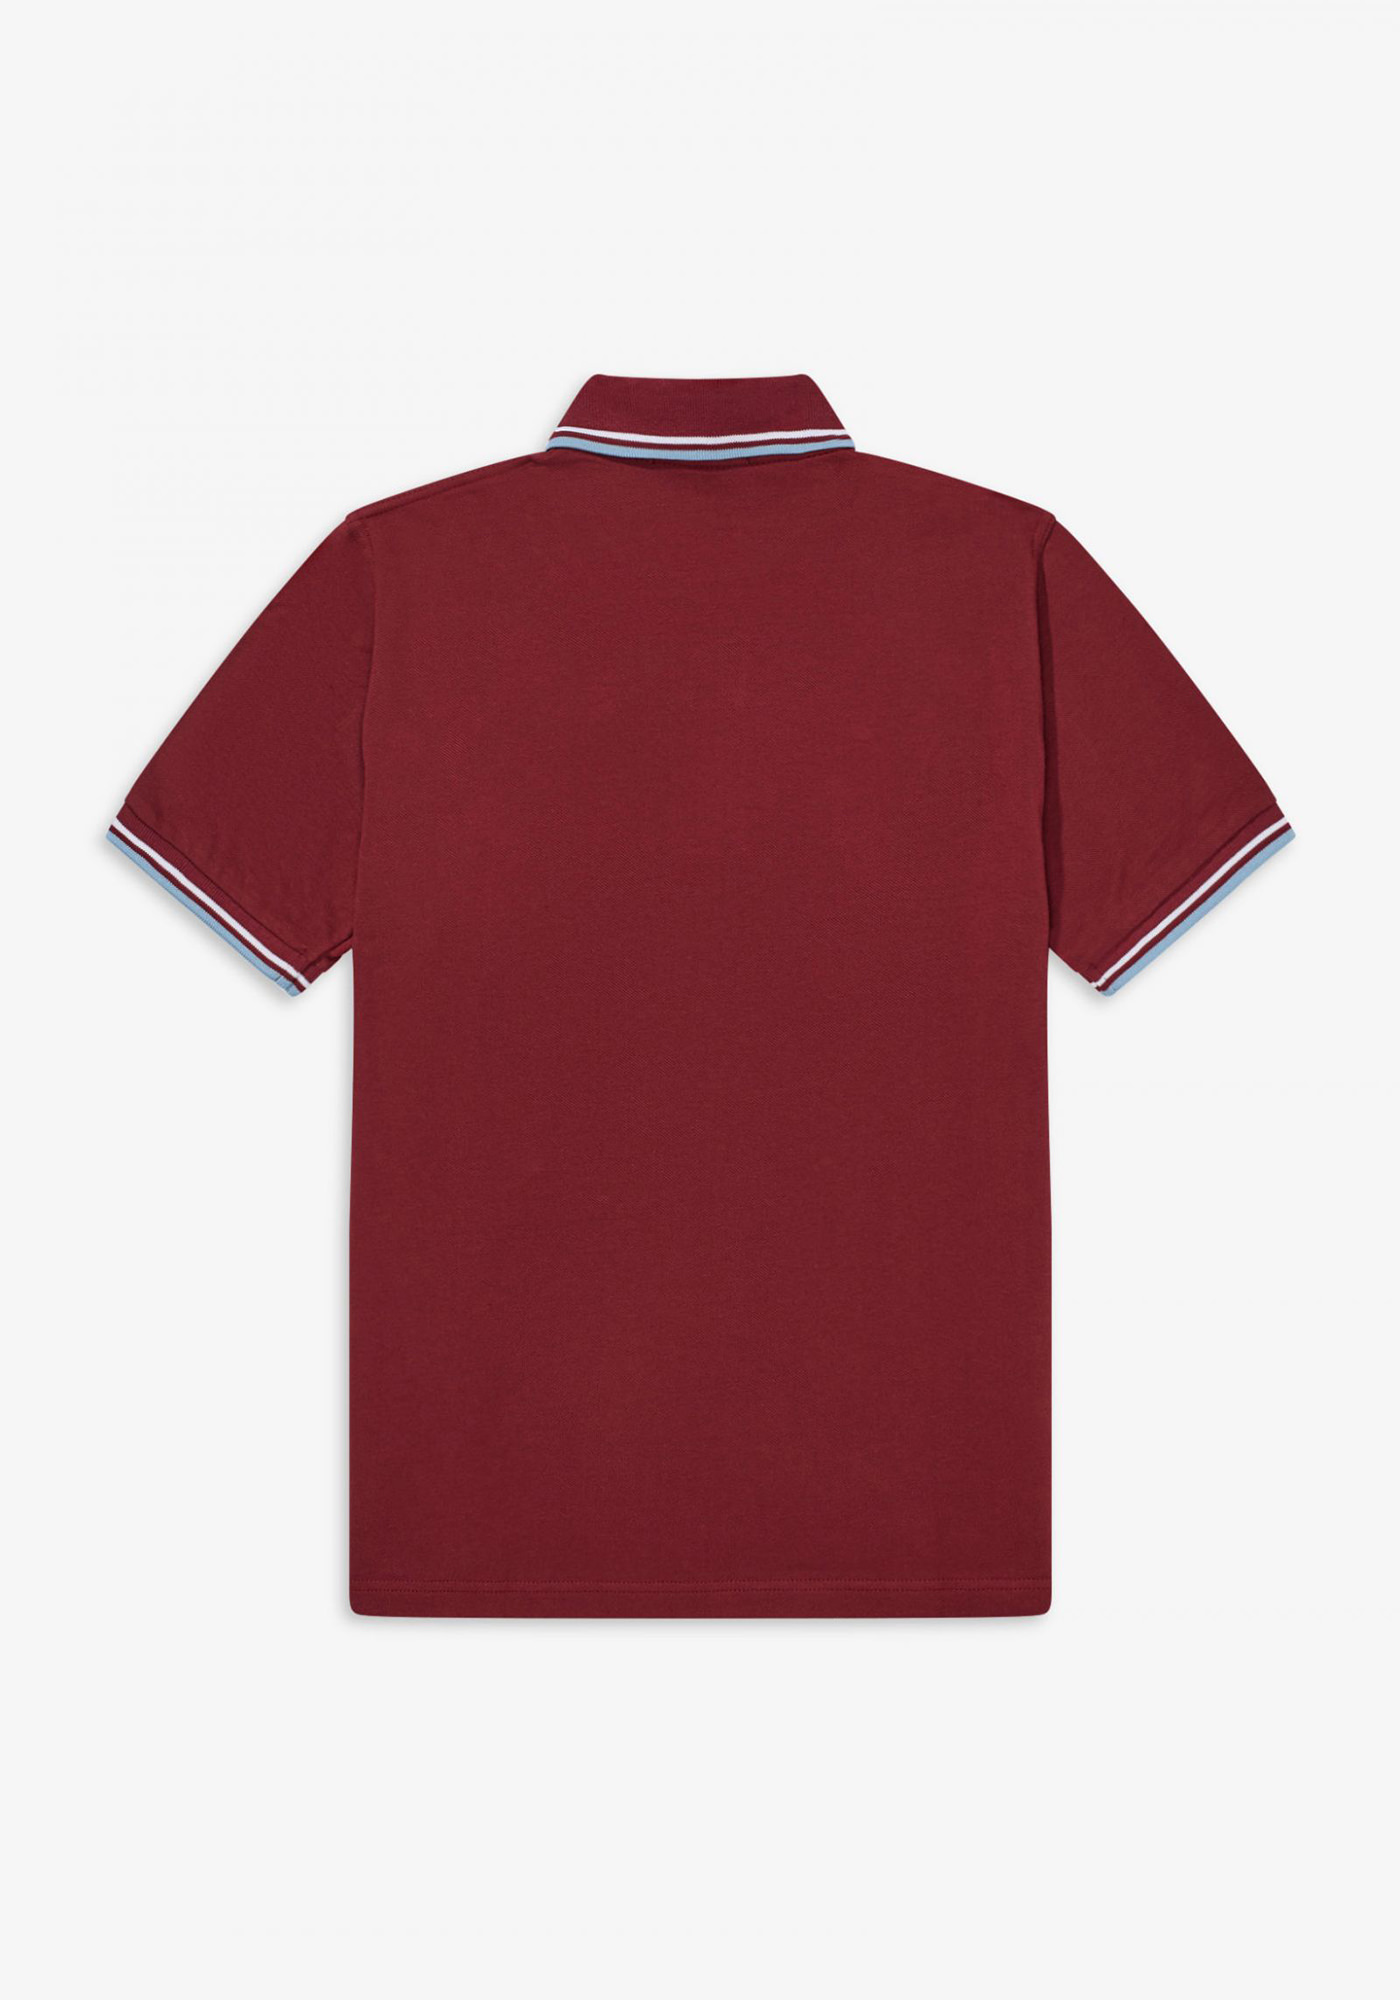 The Fred Perry Shirt - M12(36 157: BLACK / CHAMP / CHAMP)｜ FRED ...